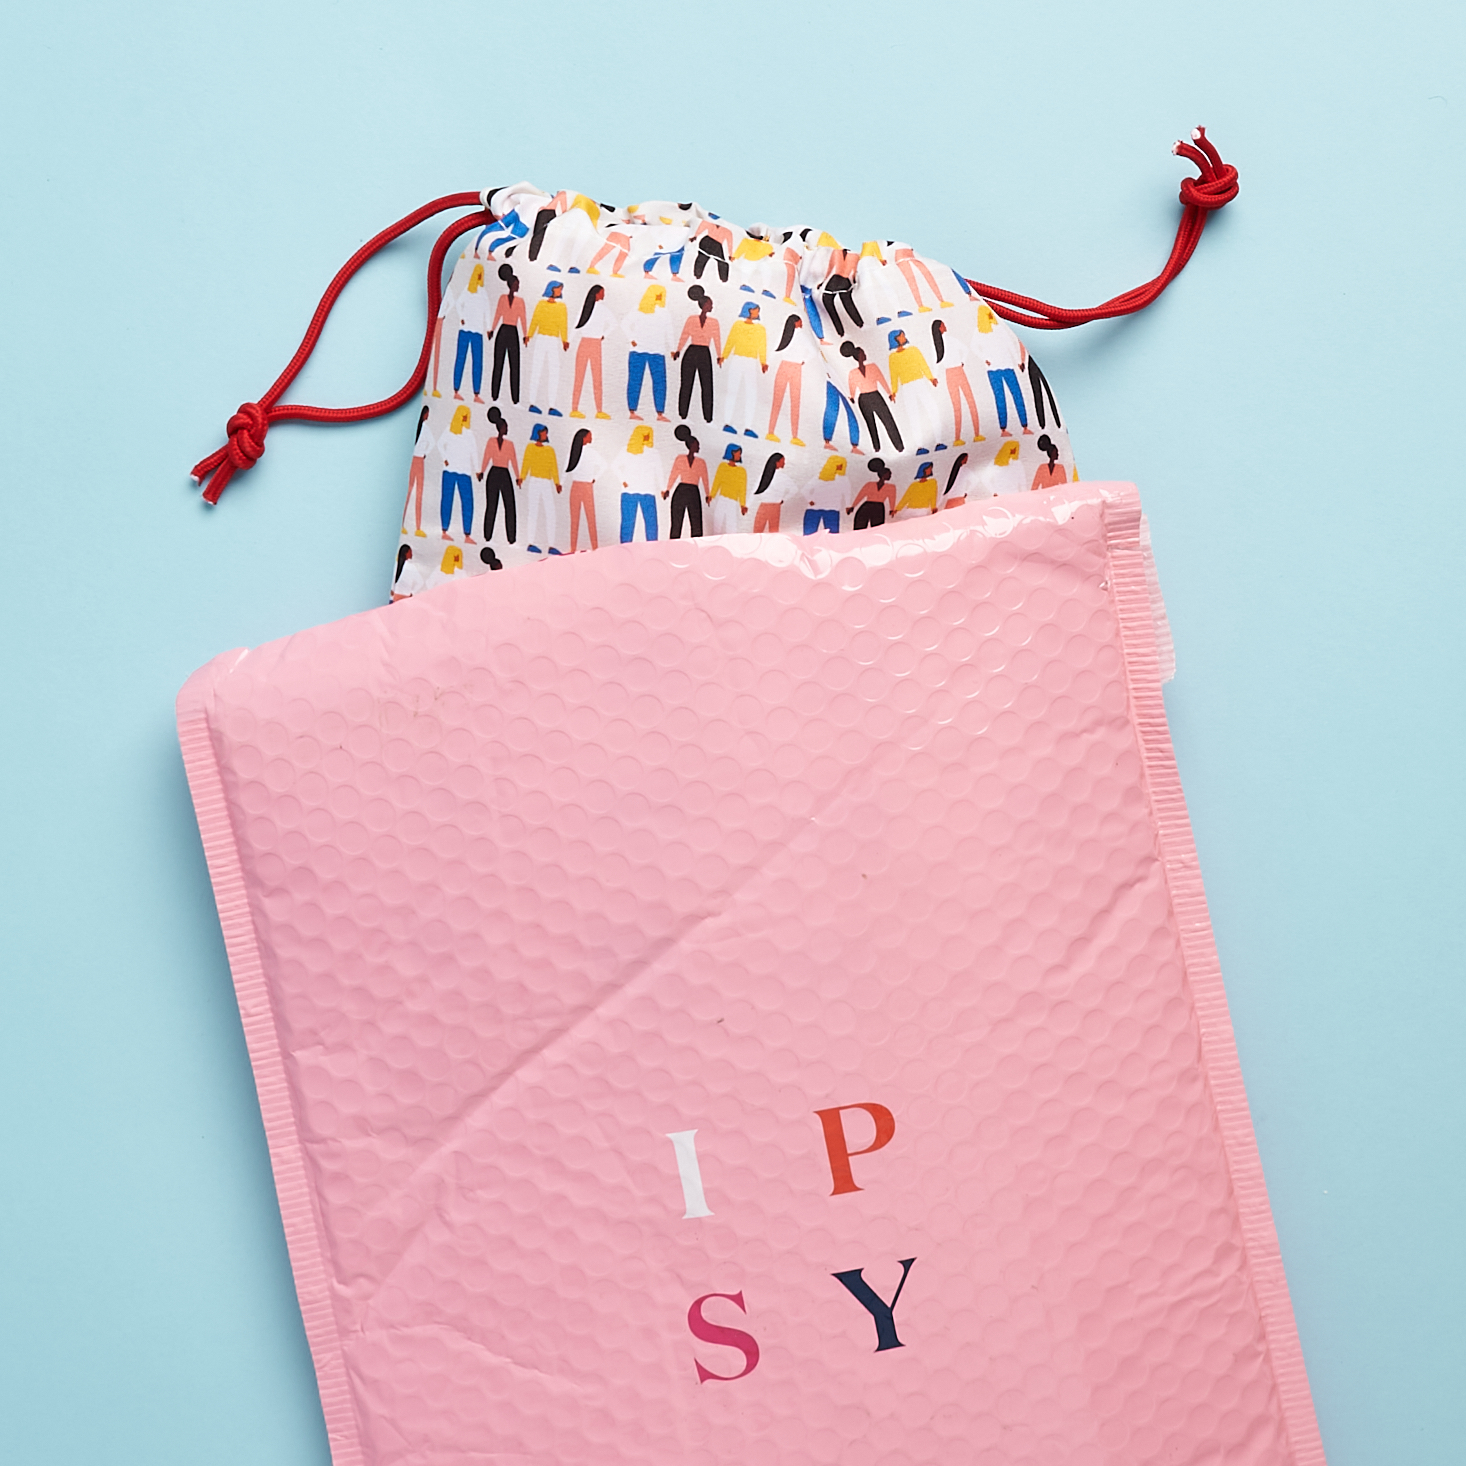 It’s Ipsy Glam Bag May 2021 Choice Time